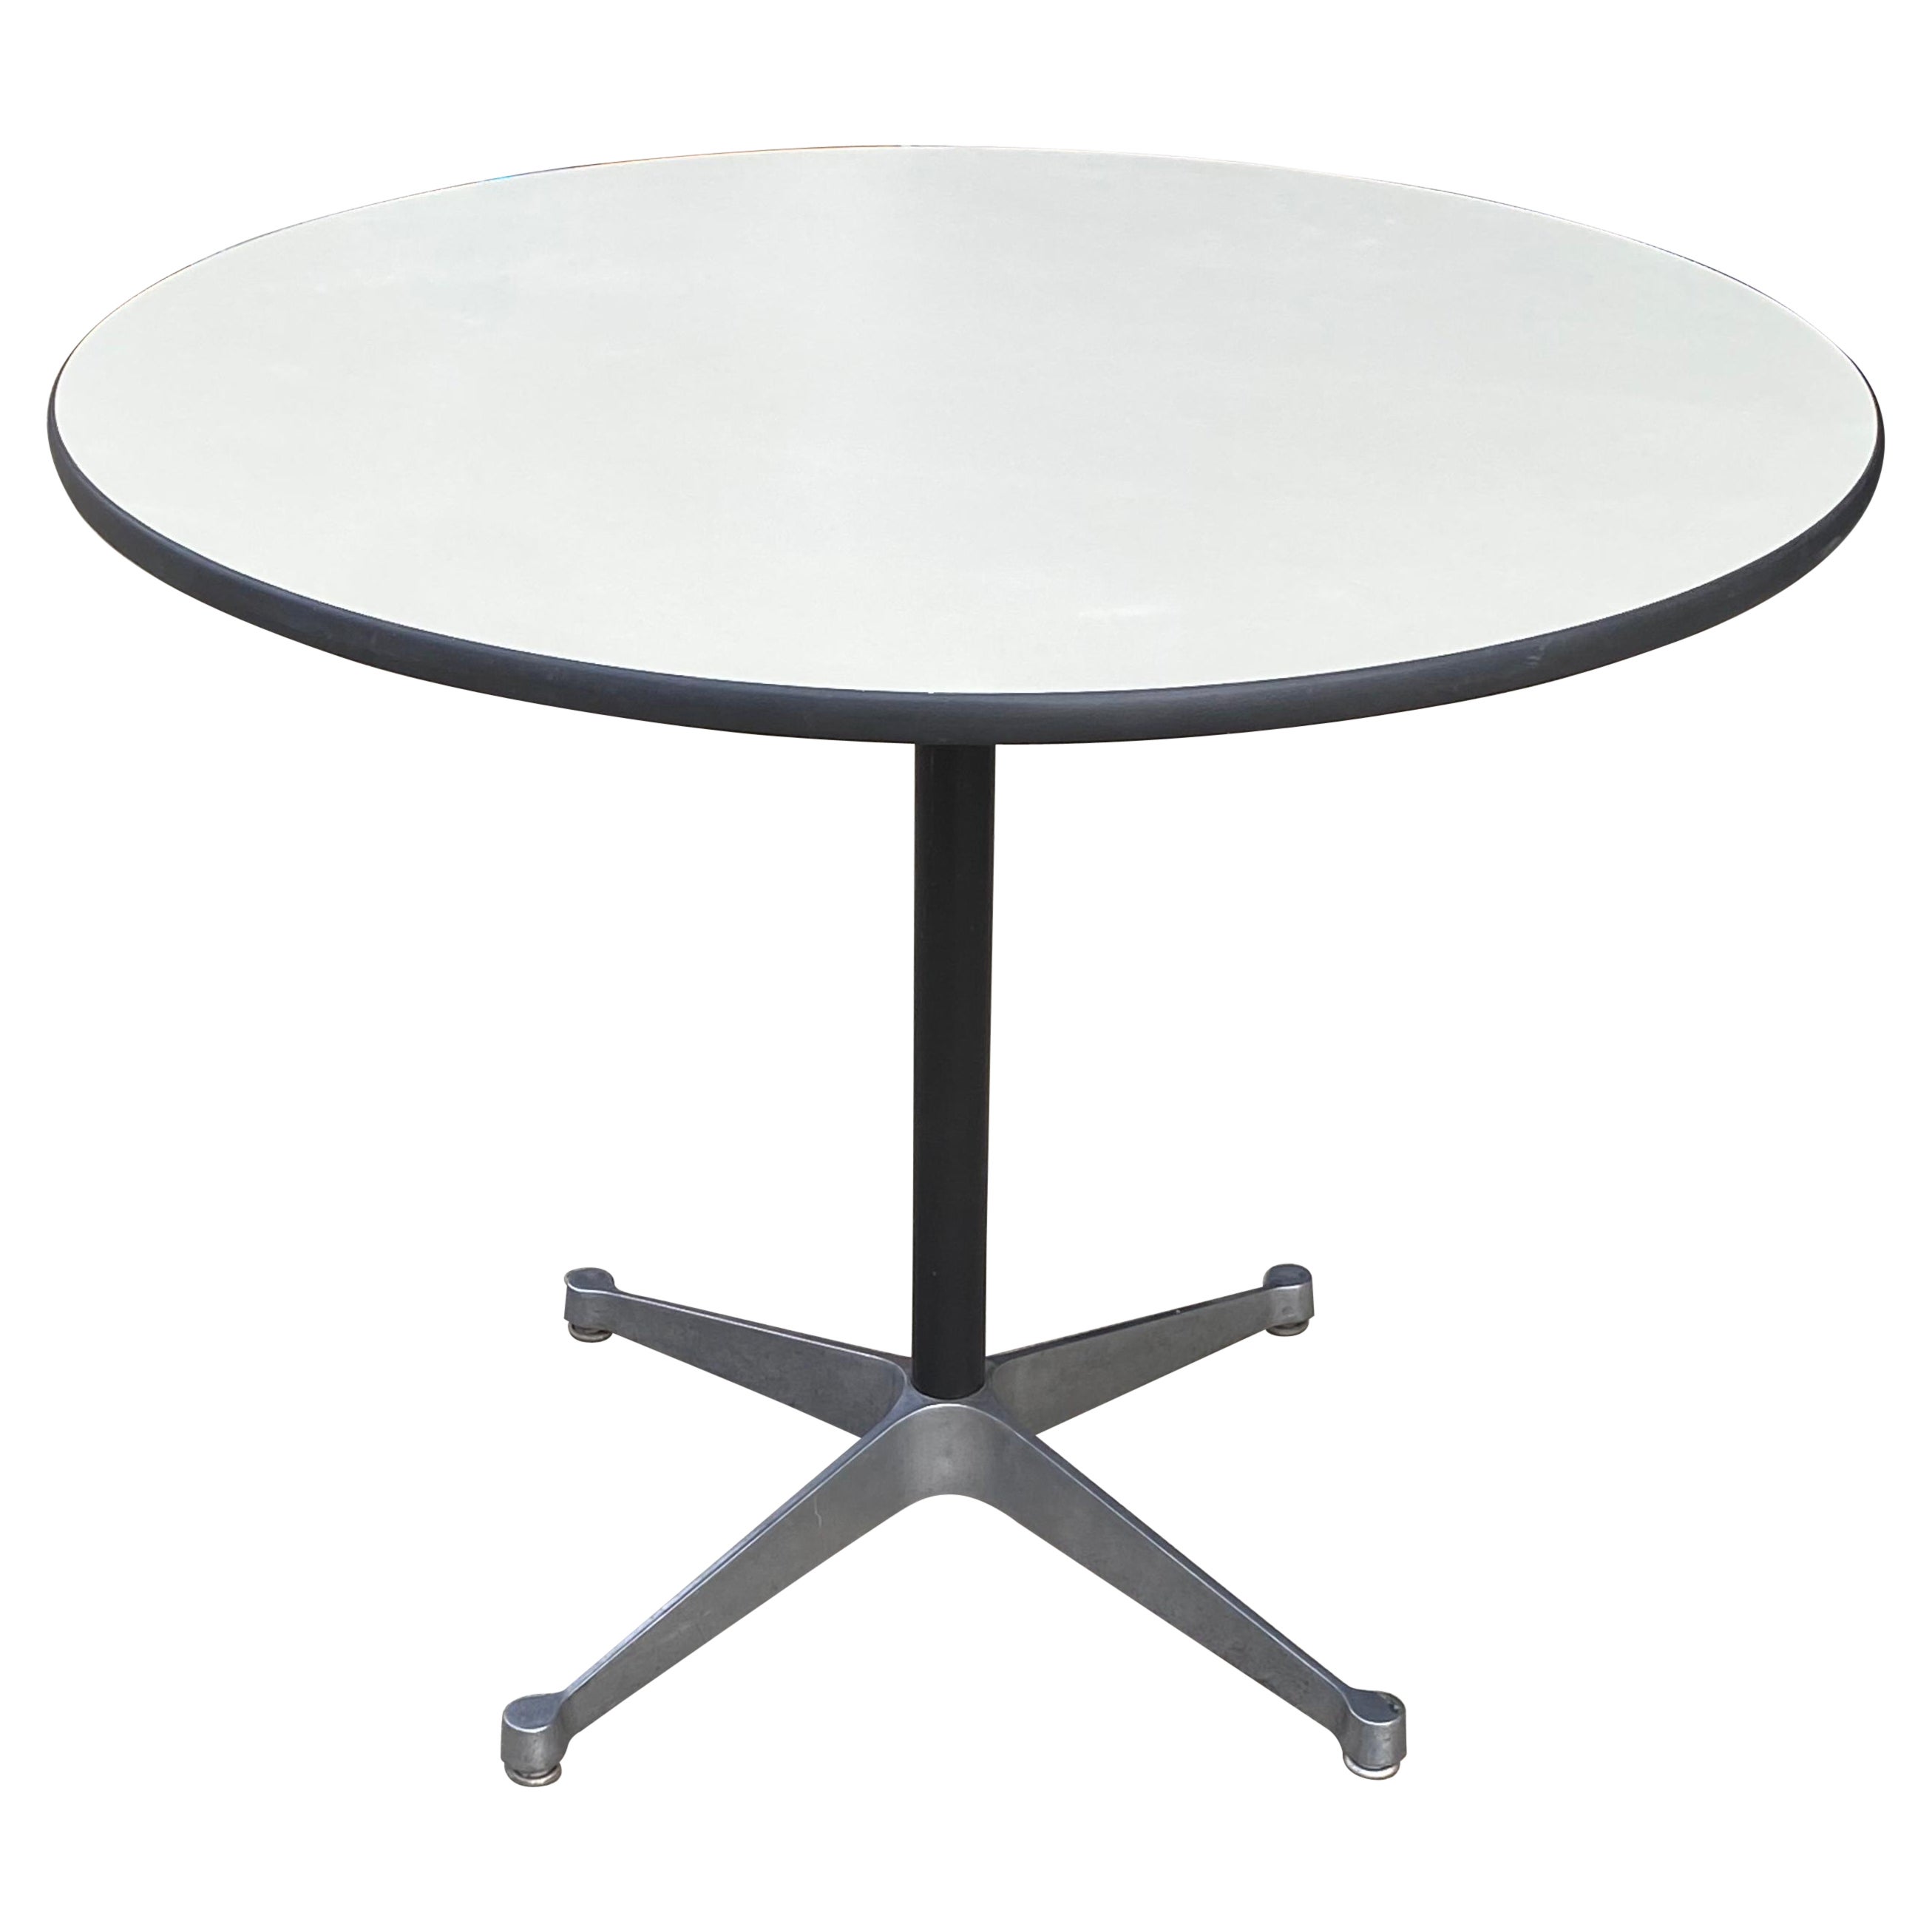 Classic and elegant Eames dining table for Herman Miller. White laminate round 36” tabletop with durable banded edge, atop black pole and cast aluminum 4 leg base. In good original condition. Signed with two Herman Miller labels, and stamped with